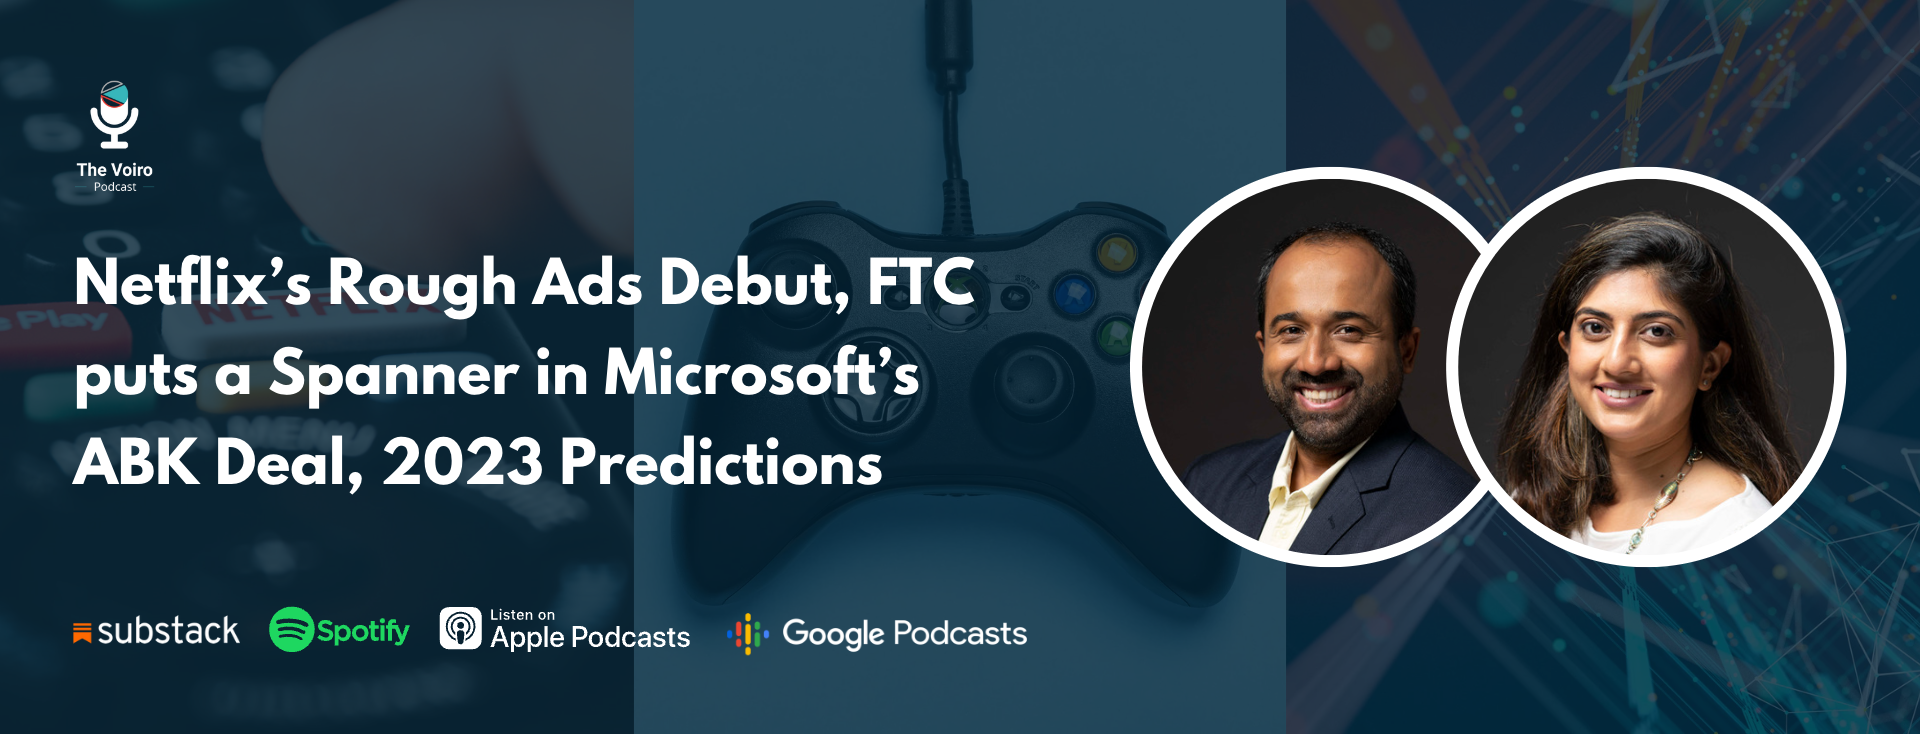 https://voiro.com/podcast/Netflixs-Rough-Ads-Debut-FTC-puts-a-Spanner-in-Microsofts-abk-Deal-2023-Predictions